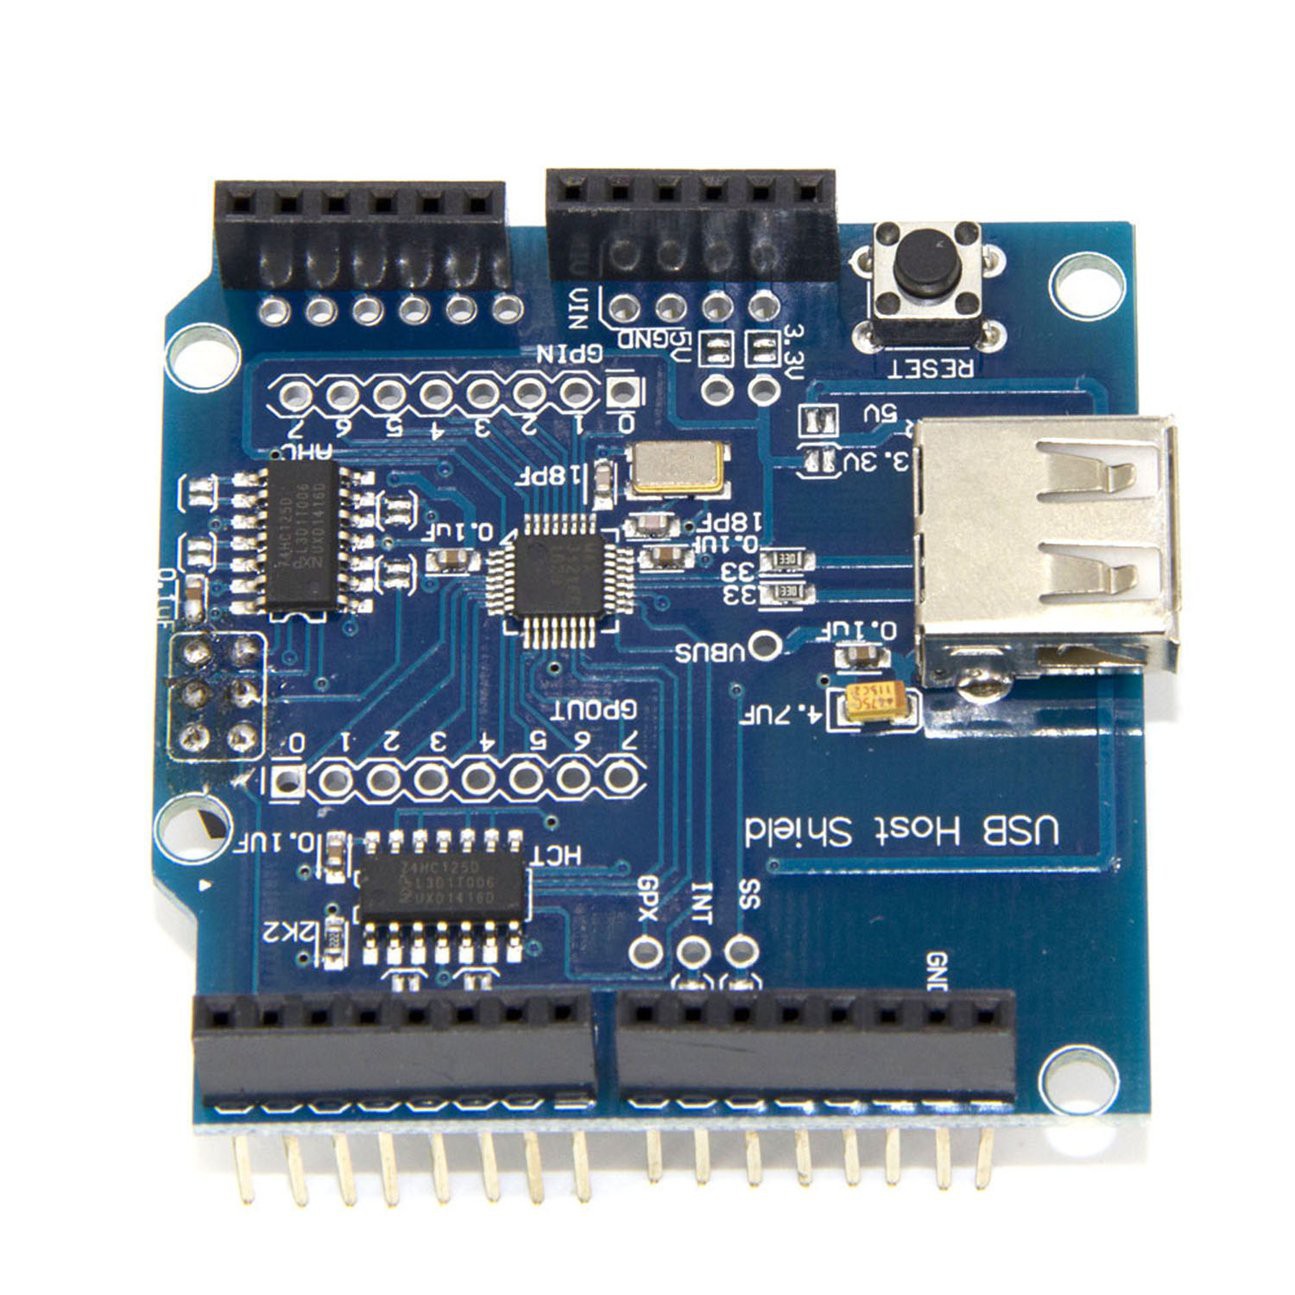 Bảng Mạch Hỗ Trợ Google Android Adk & Uno Mega Duemilanove 2560 Arduino